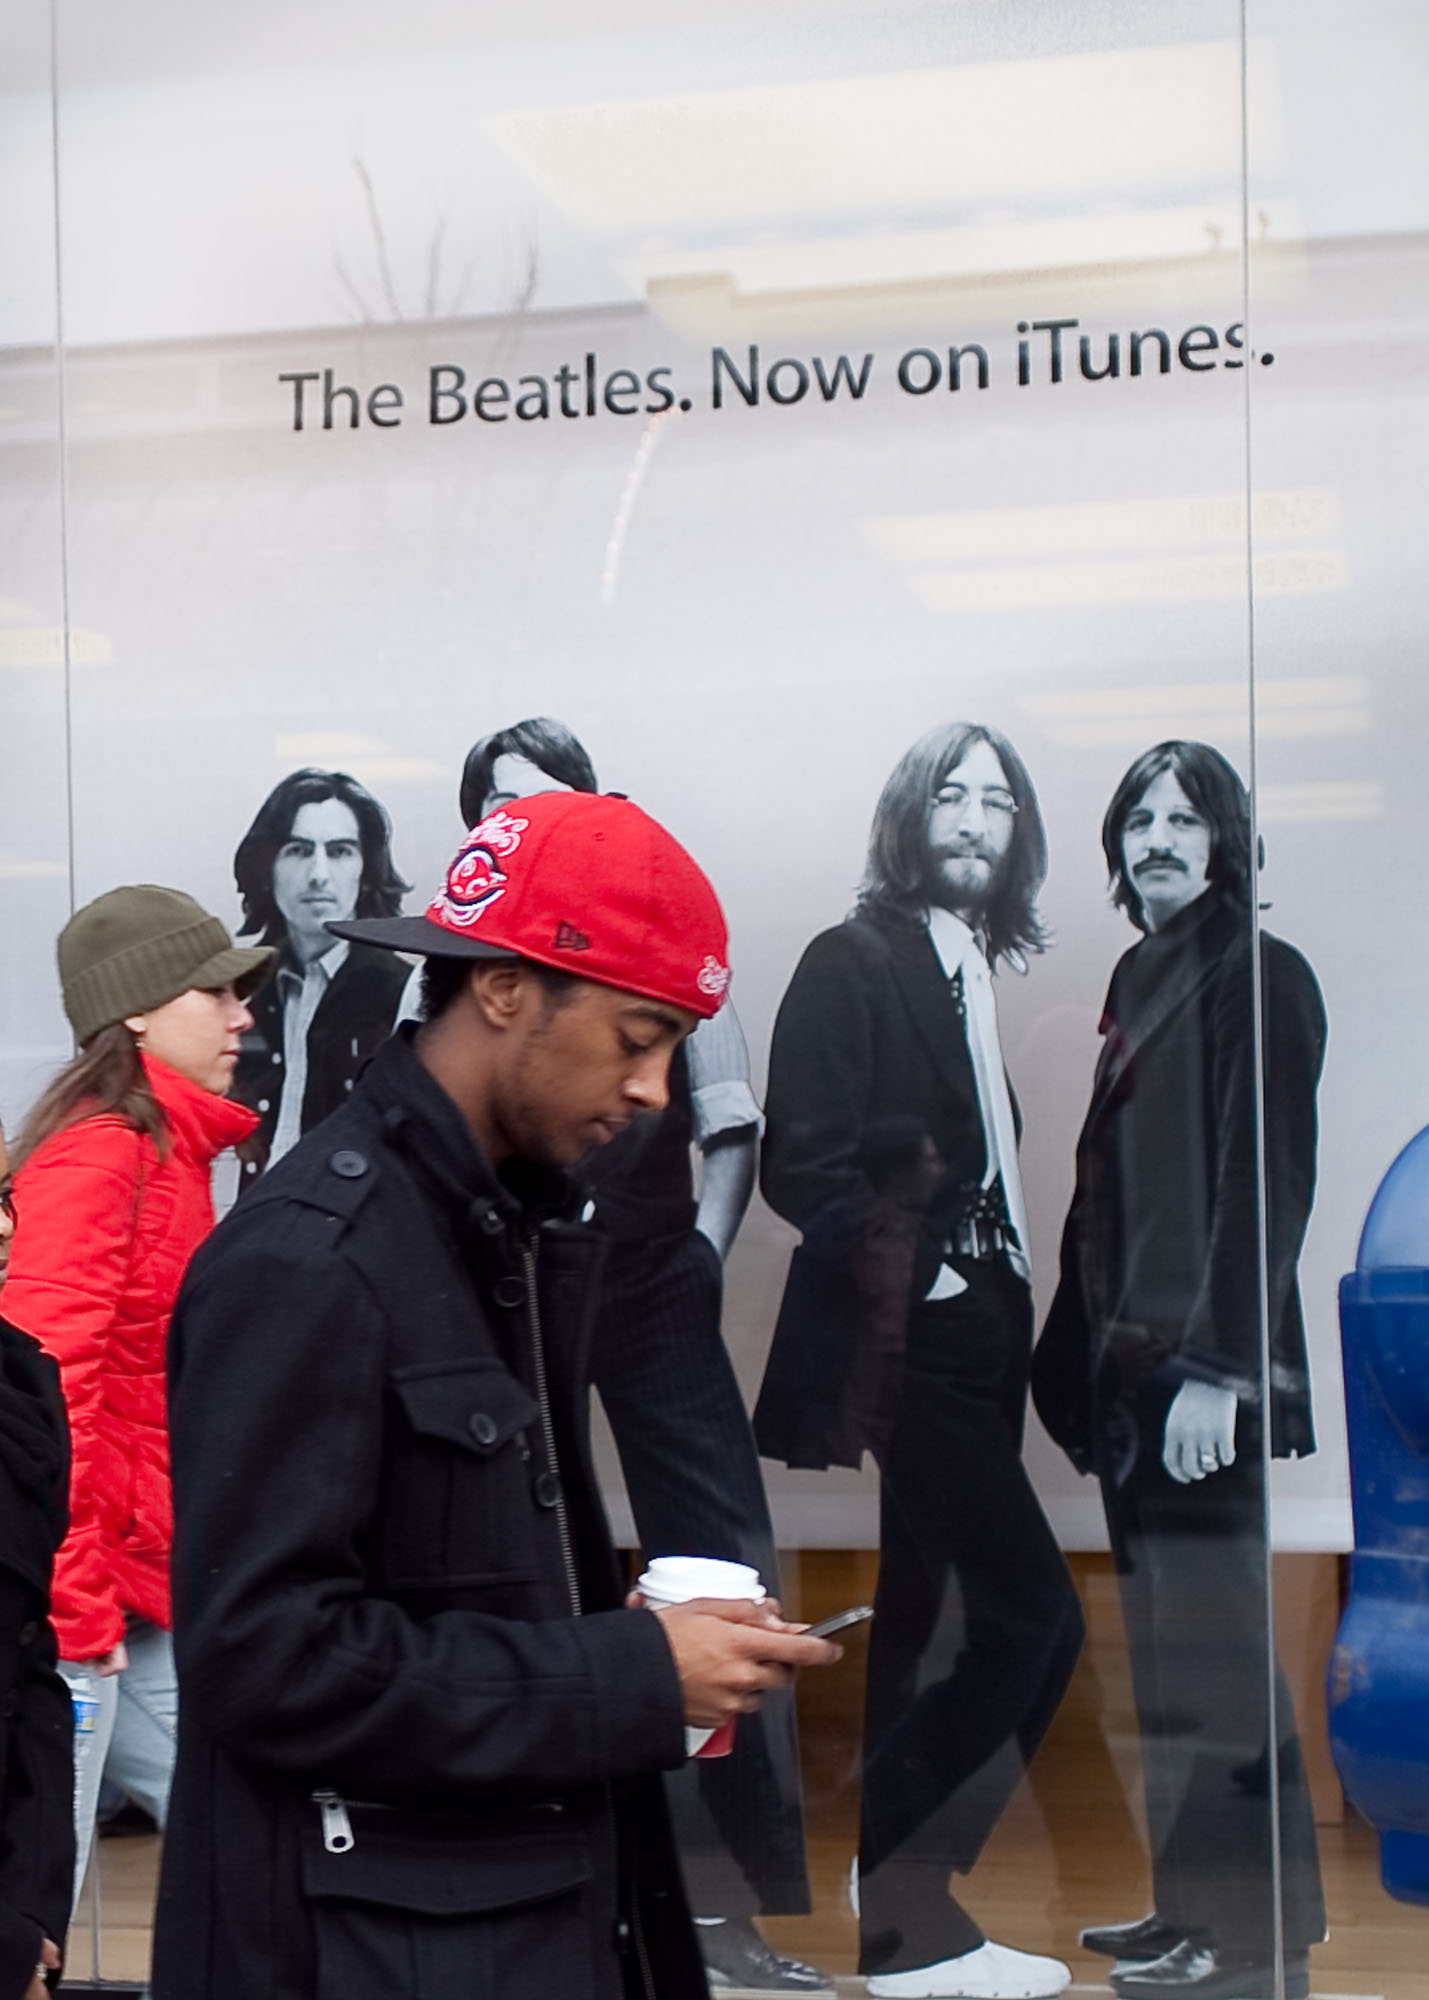 A young man stays connected on his cell phone as he strolls by a store advertising the Beatles' music on Apple's online store.